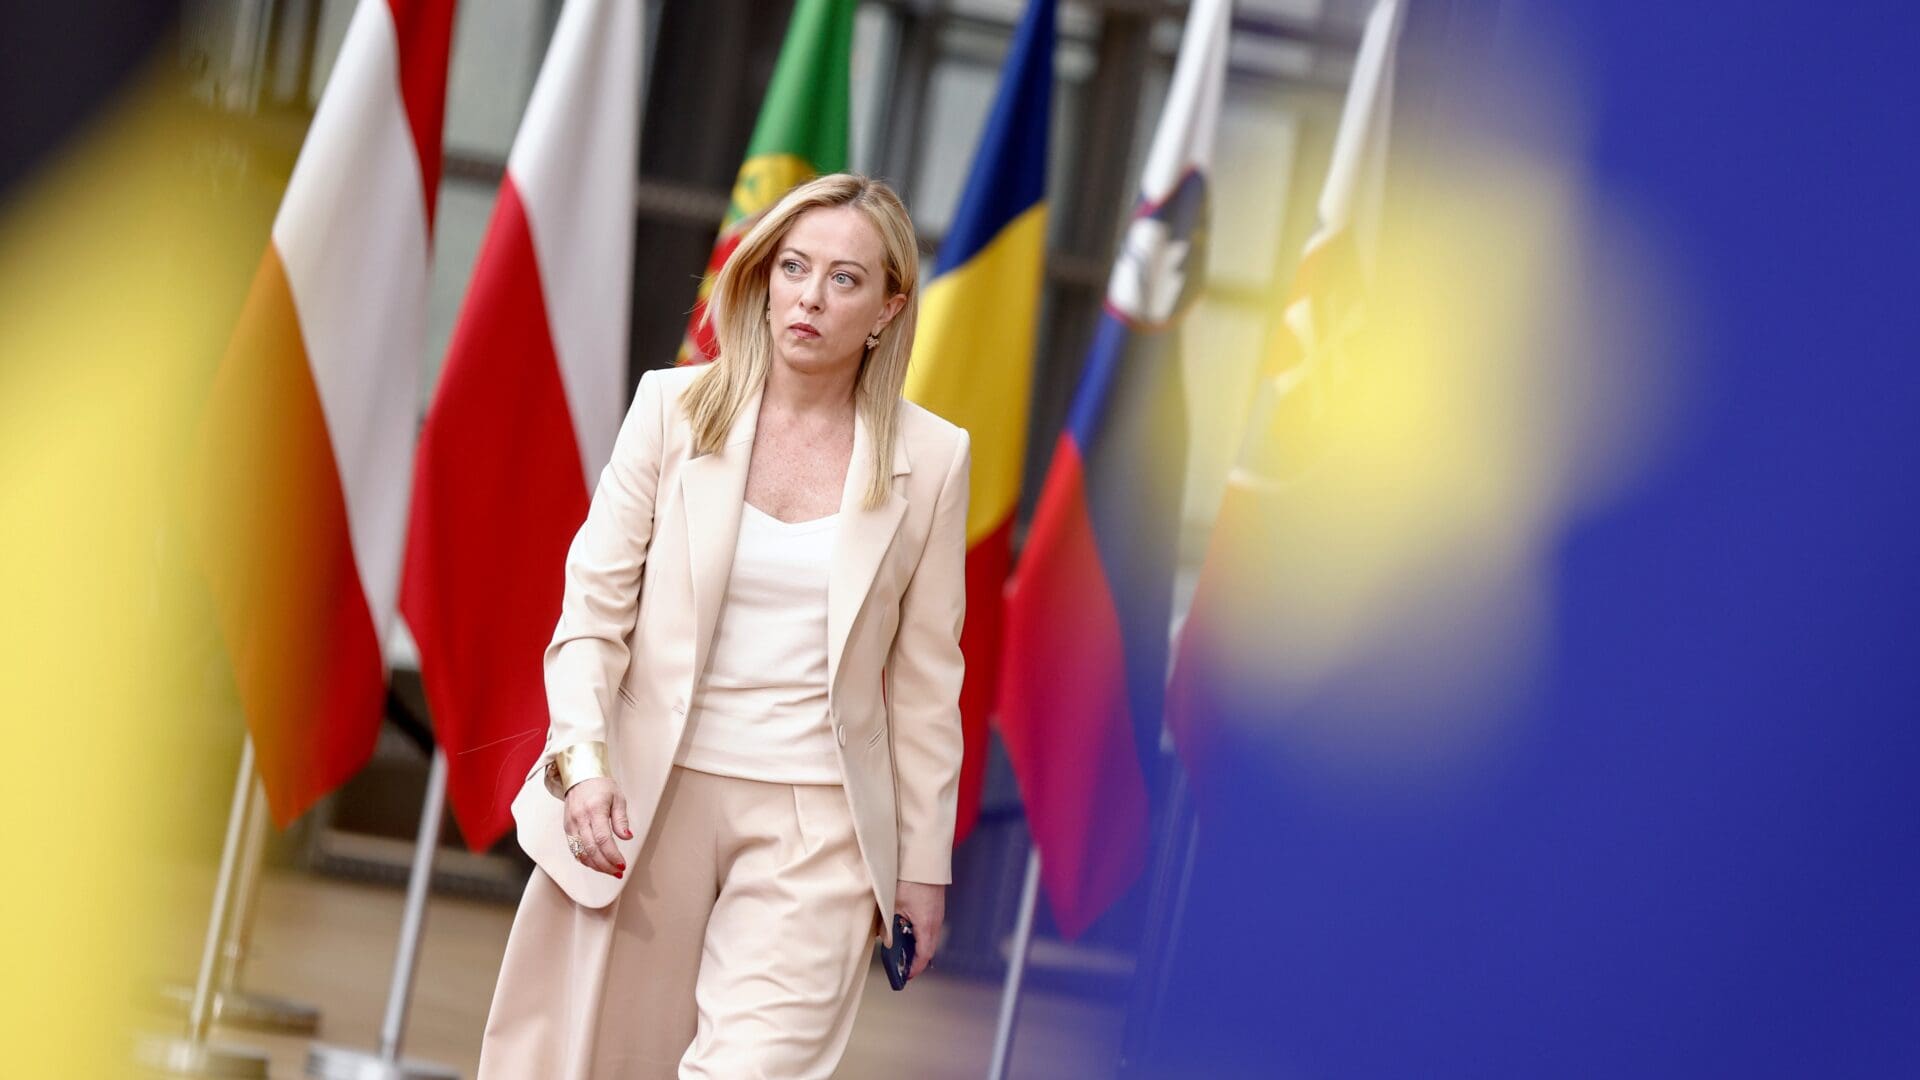 Prime Minister Giorgia Meloni arrives for a European Council Summit, at the EU headquarters in Brussels, on 29 June 2023.